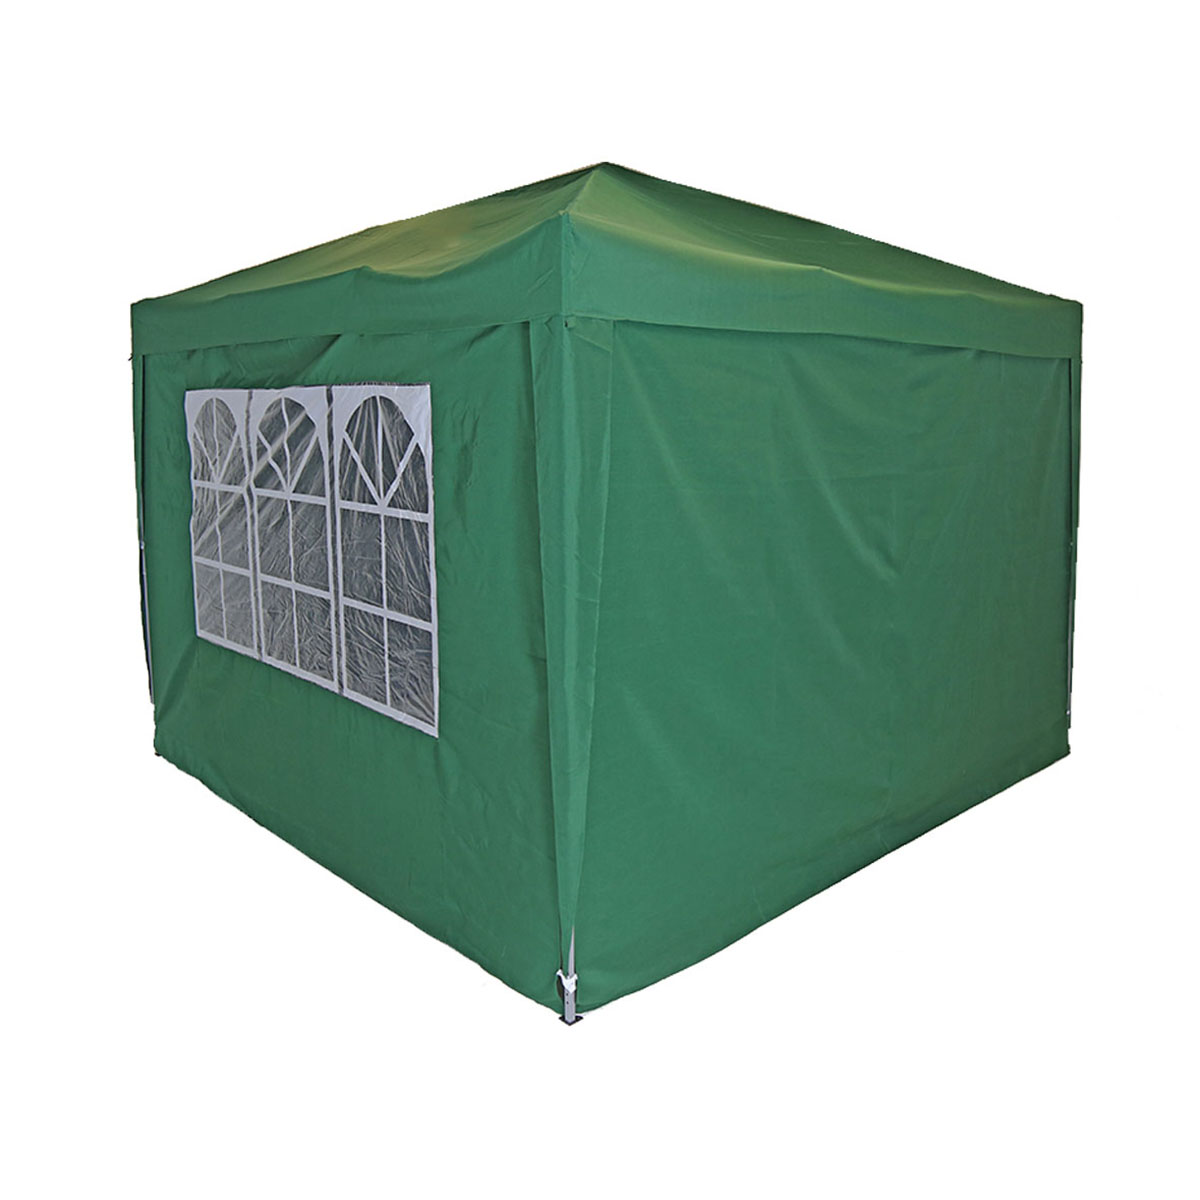 Charles Bentley 3x3m Popup Gazebo With Sides Green